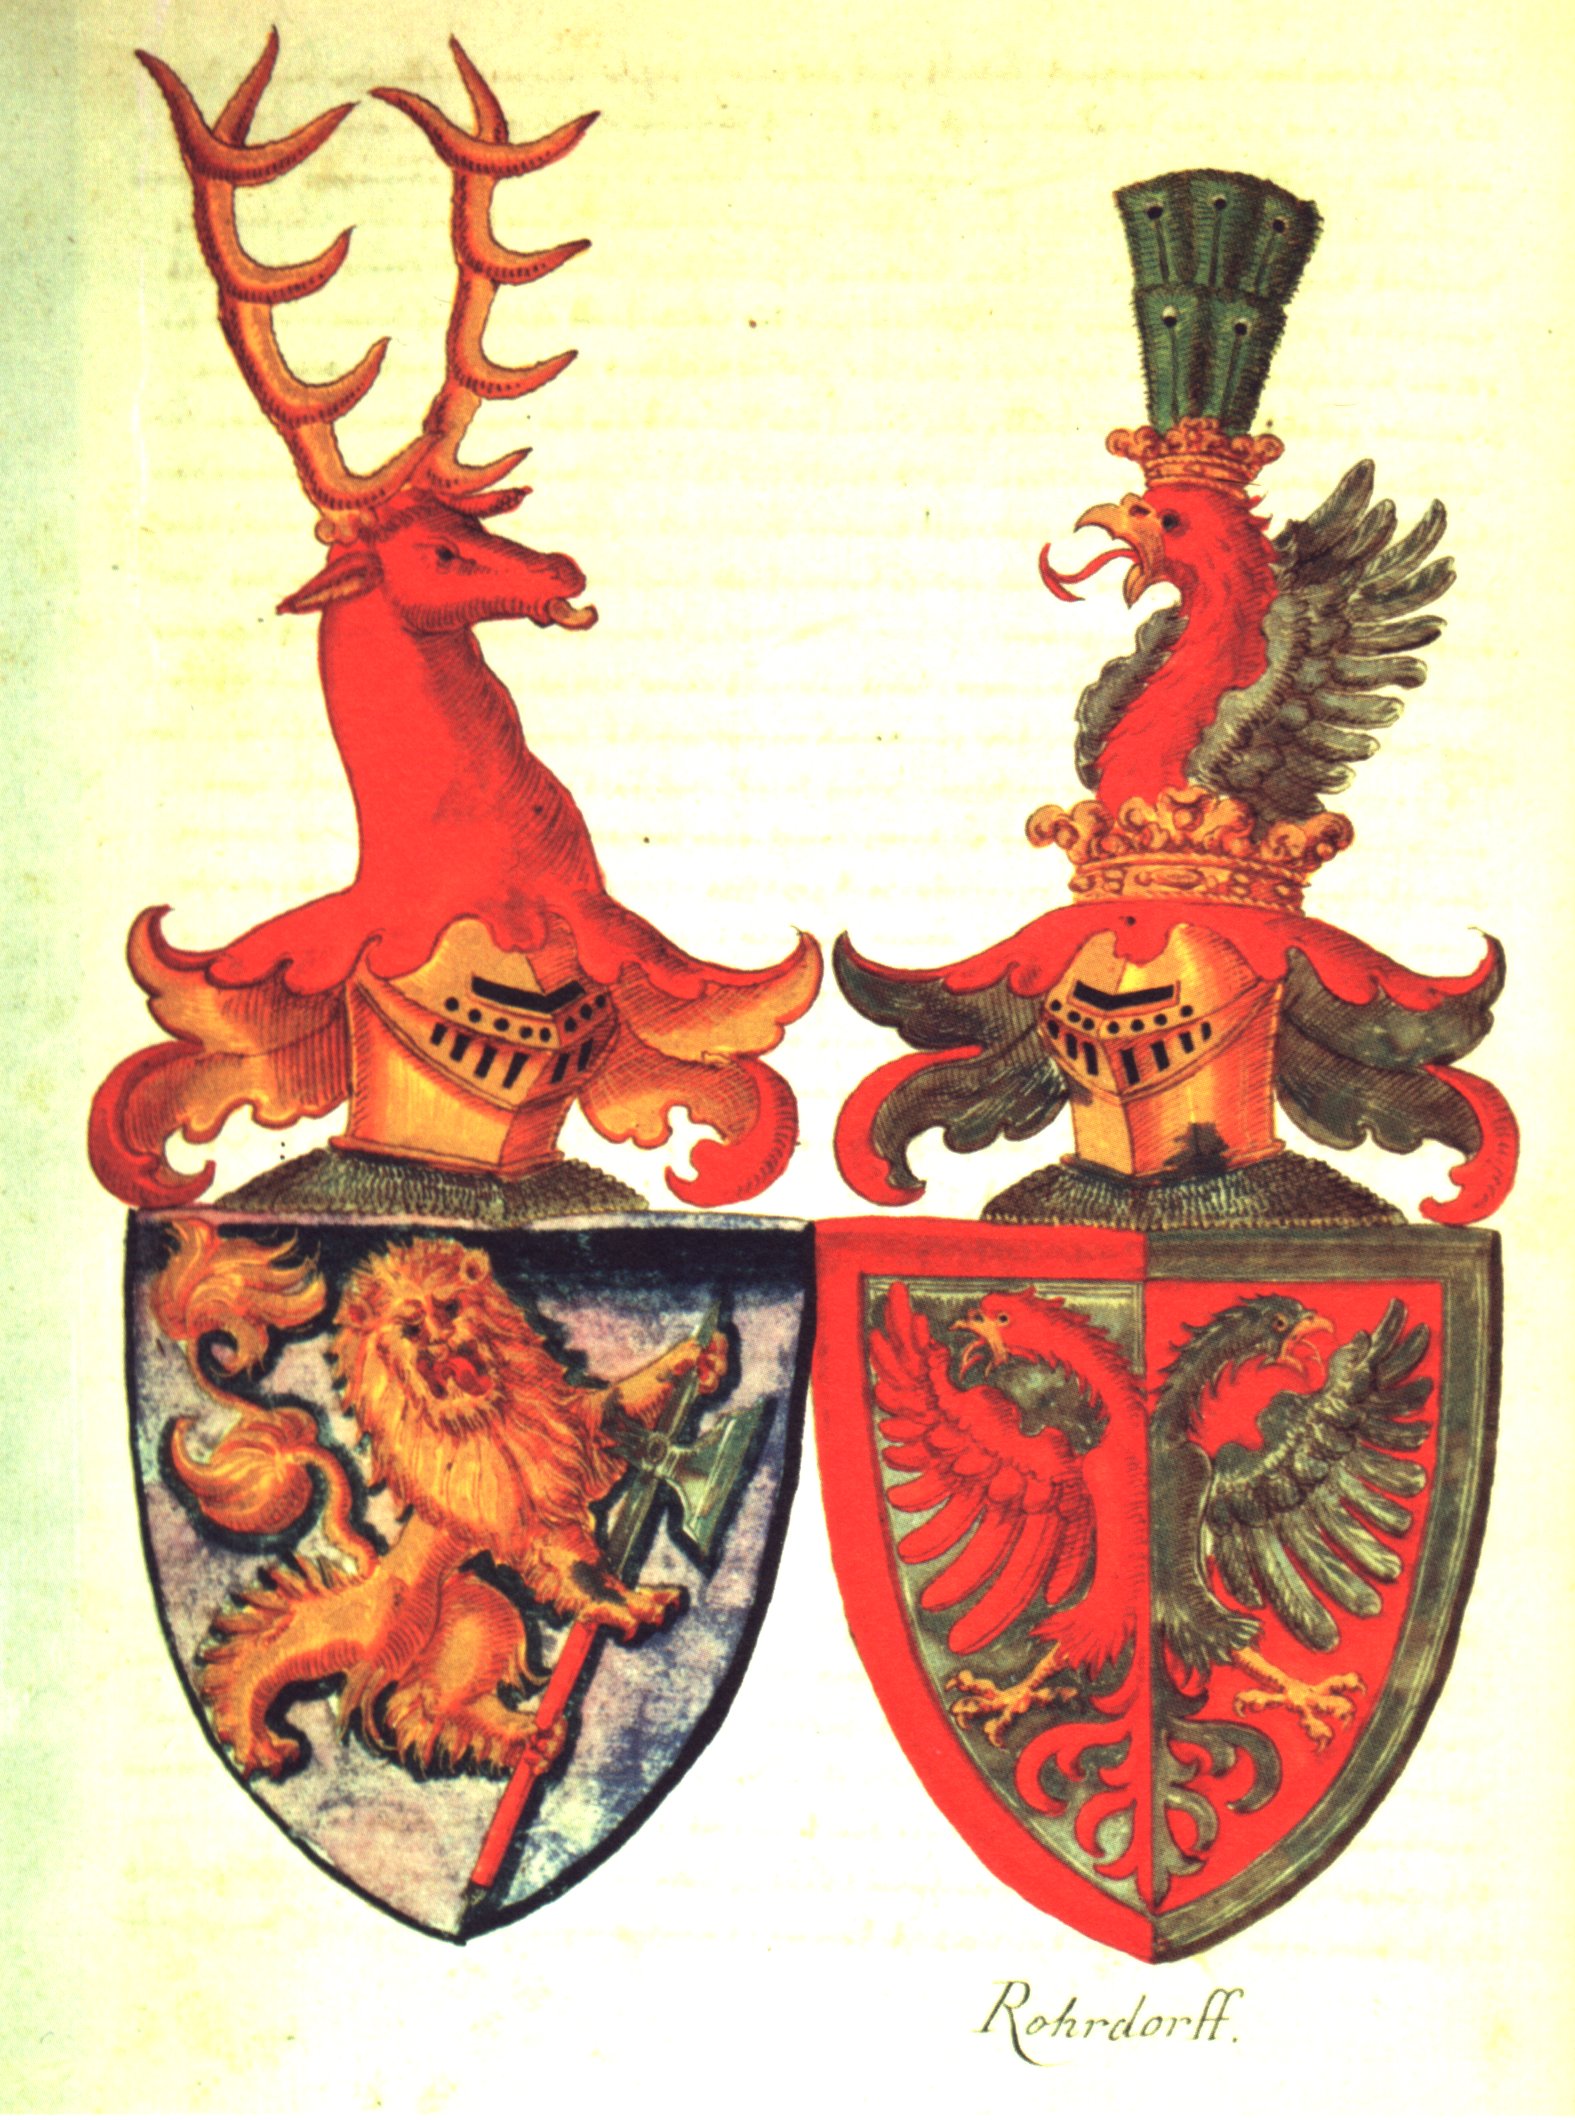 Heraldic Courtesy: Most Up-to-Date Encyclopedia, News & Reviews